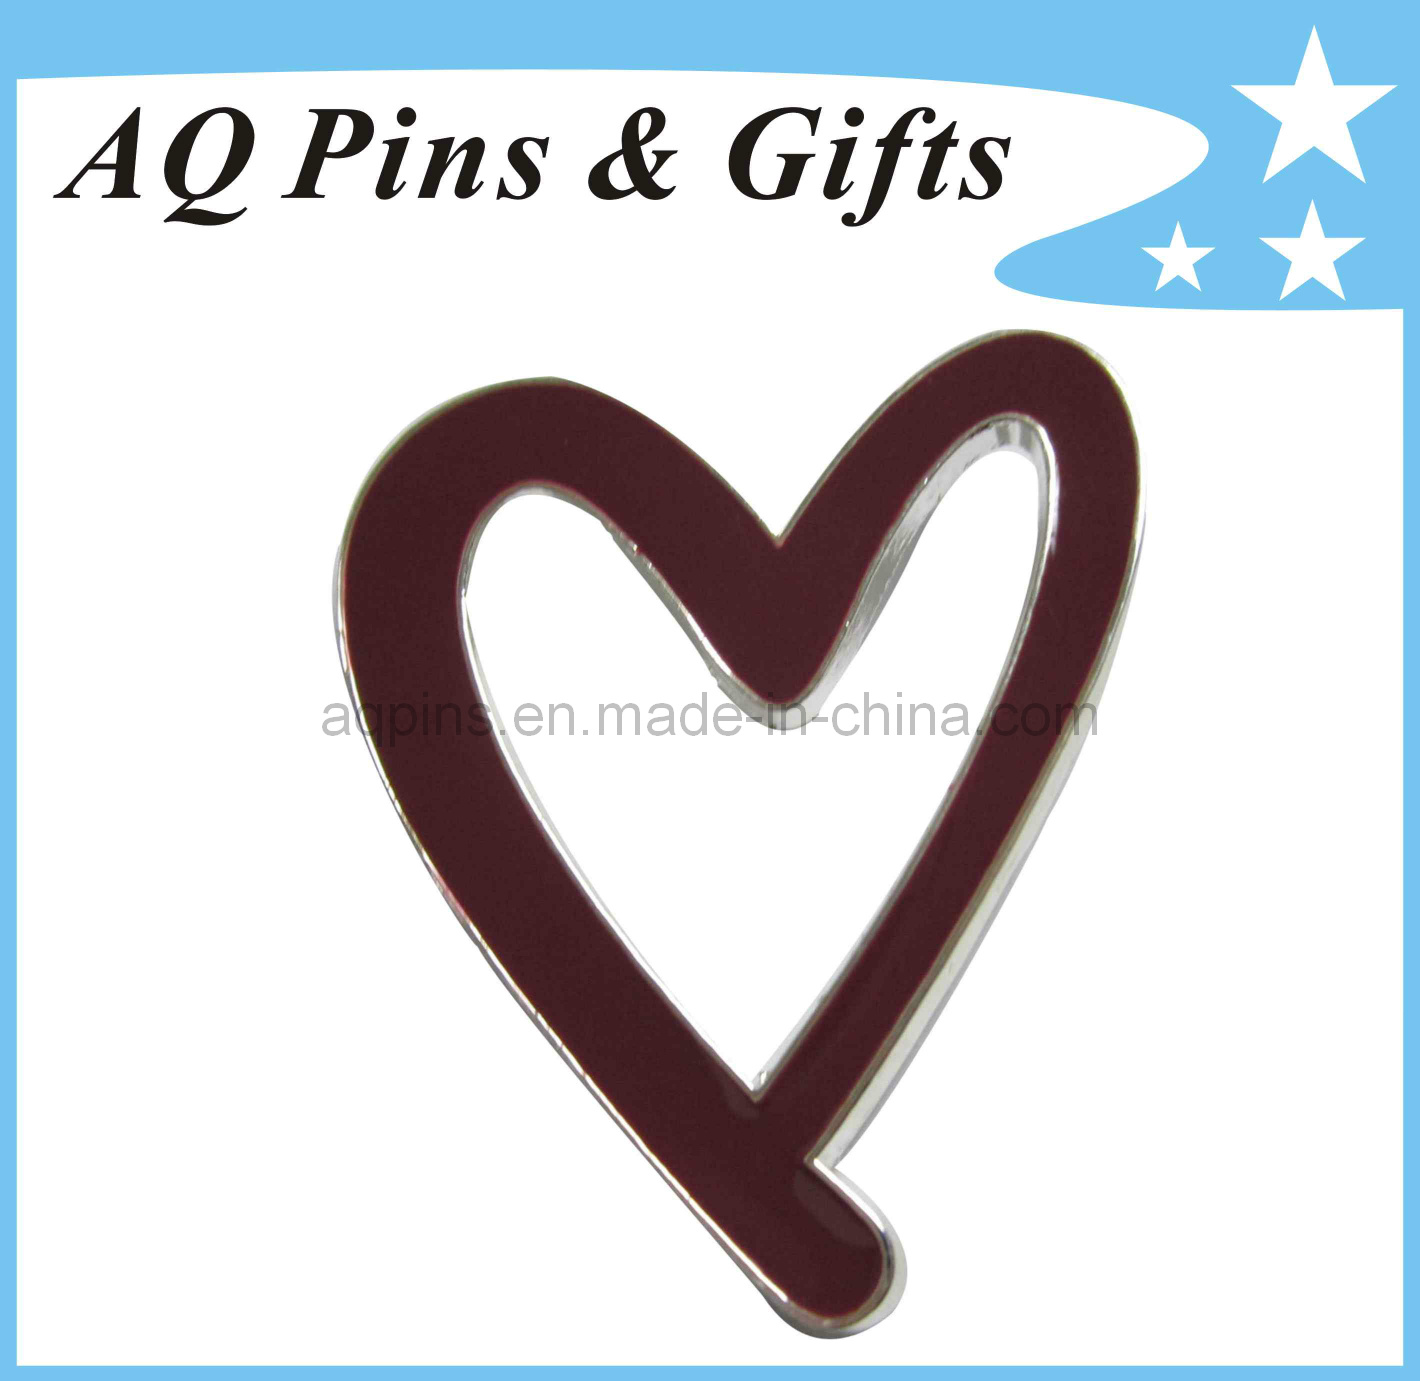 Metal Craft Cut out Pin Badge for Heart Shape Brooch (badge-031)